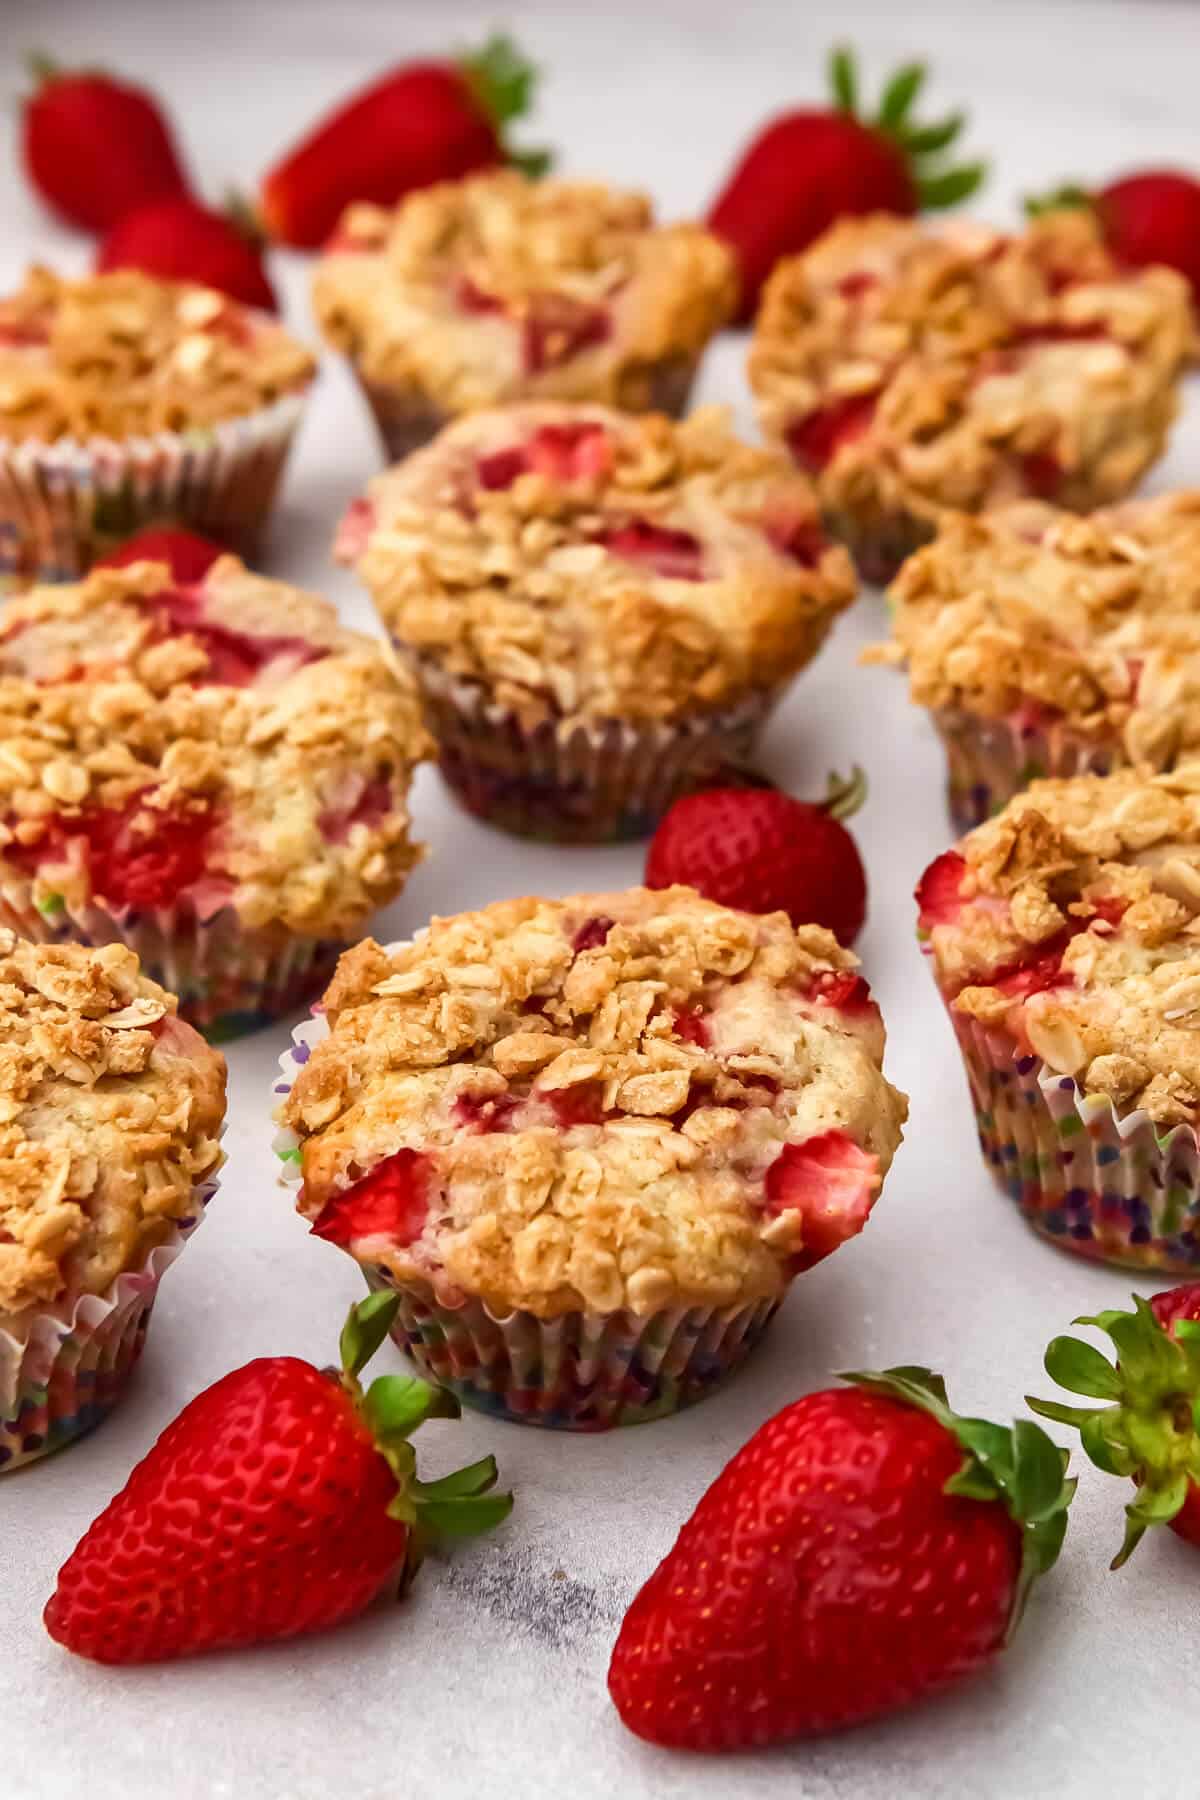 Vegan strawberry muffins on a countertop with strawberries around them.